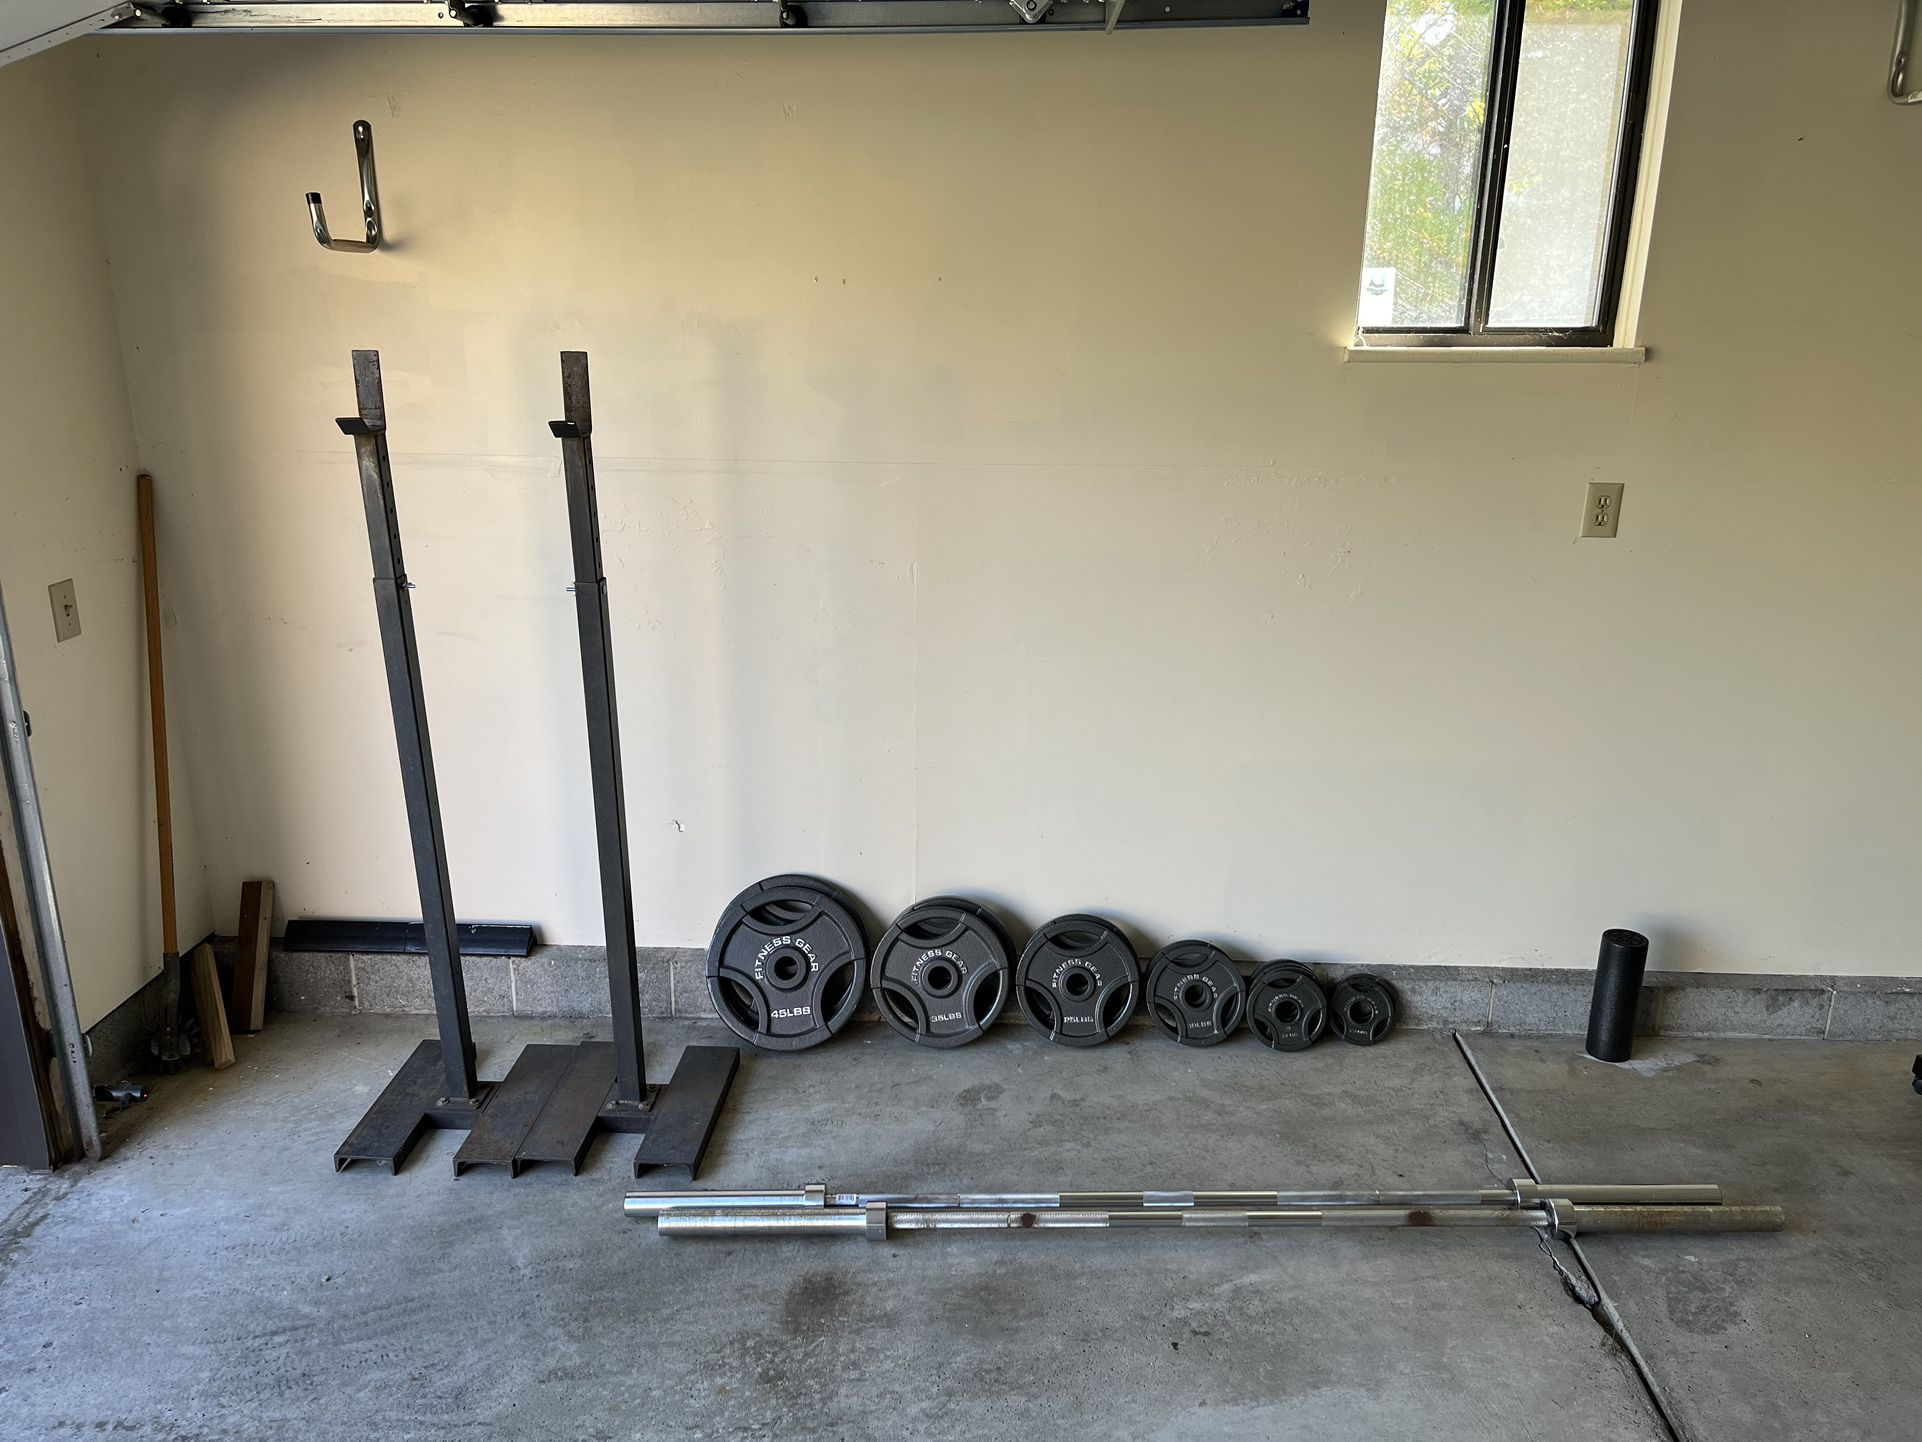 New Olympic Barbell And Plates